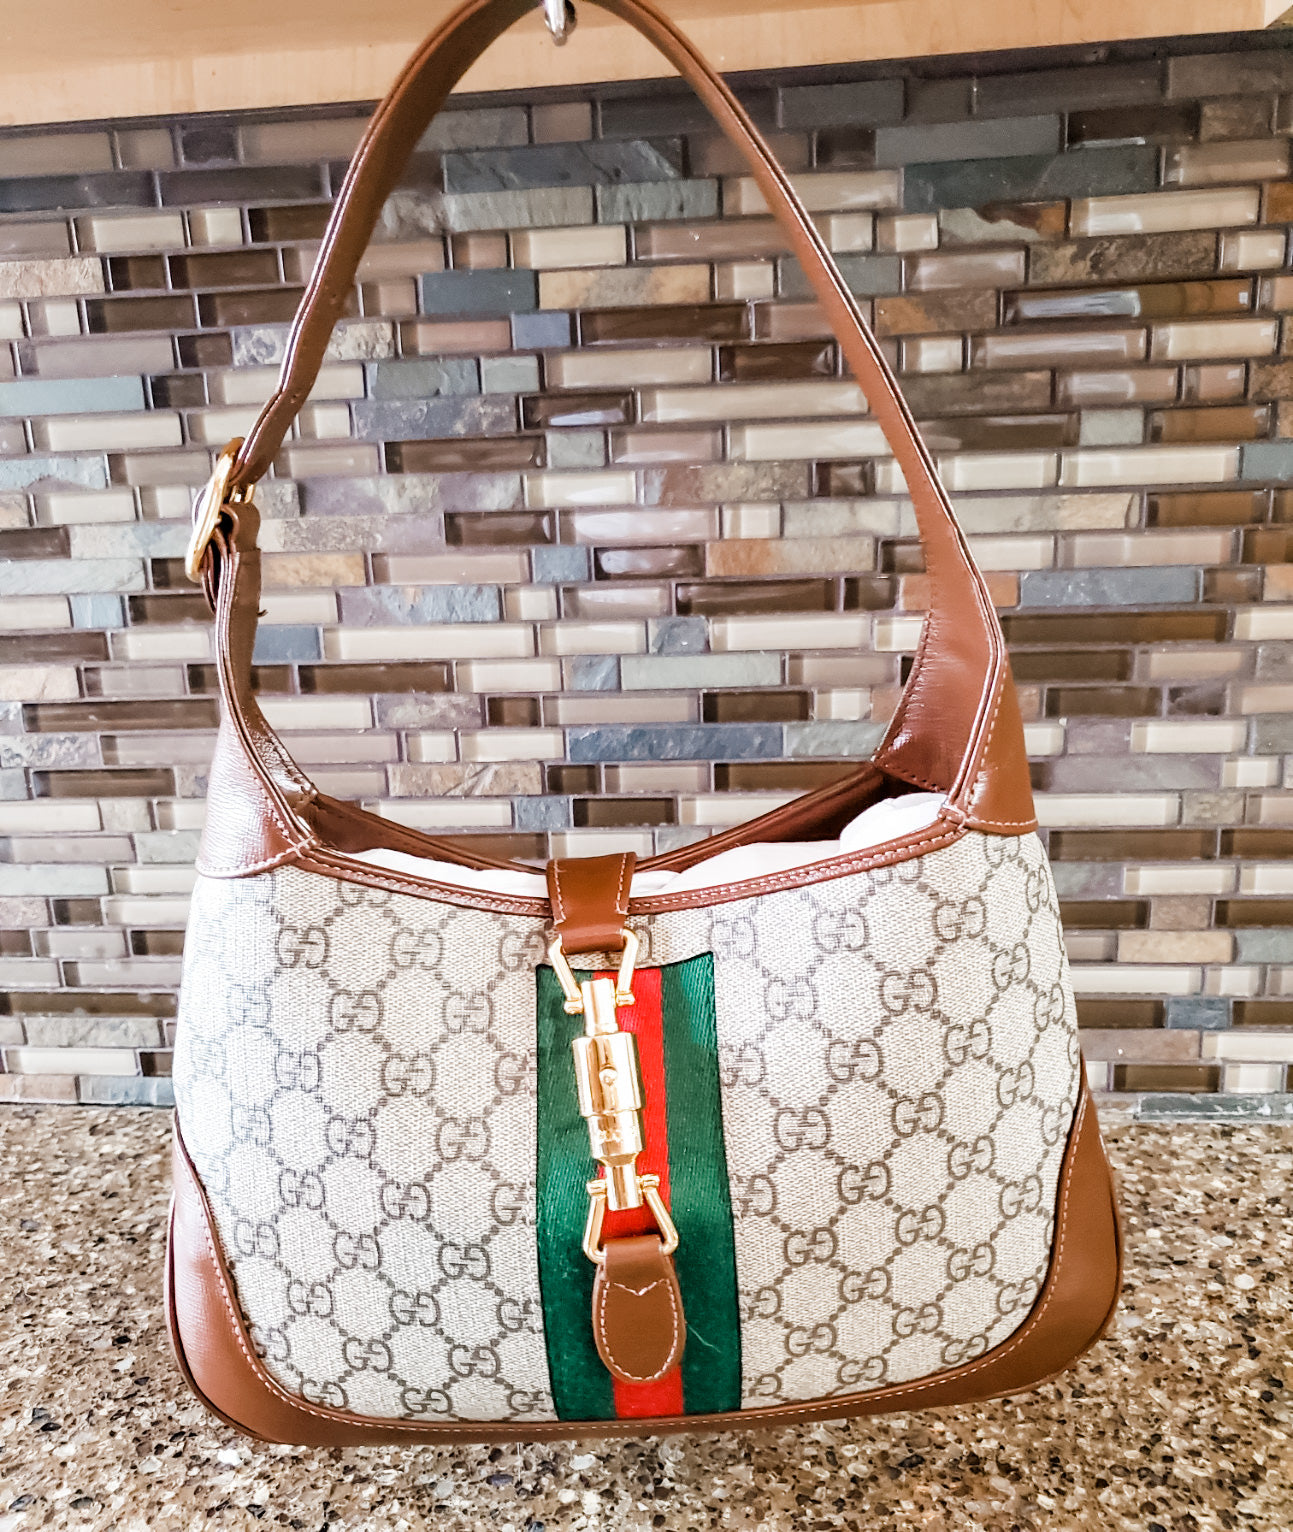 Jackie 1961 Small Shoulder Bag in Brown - Gucci